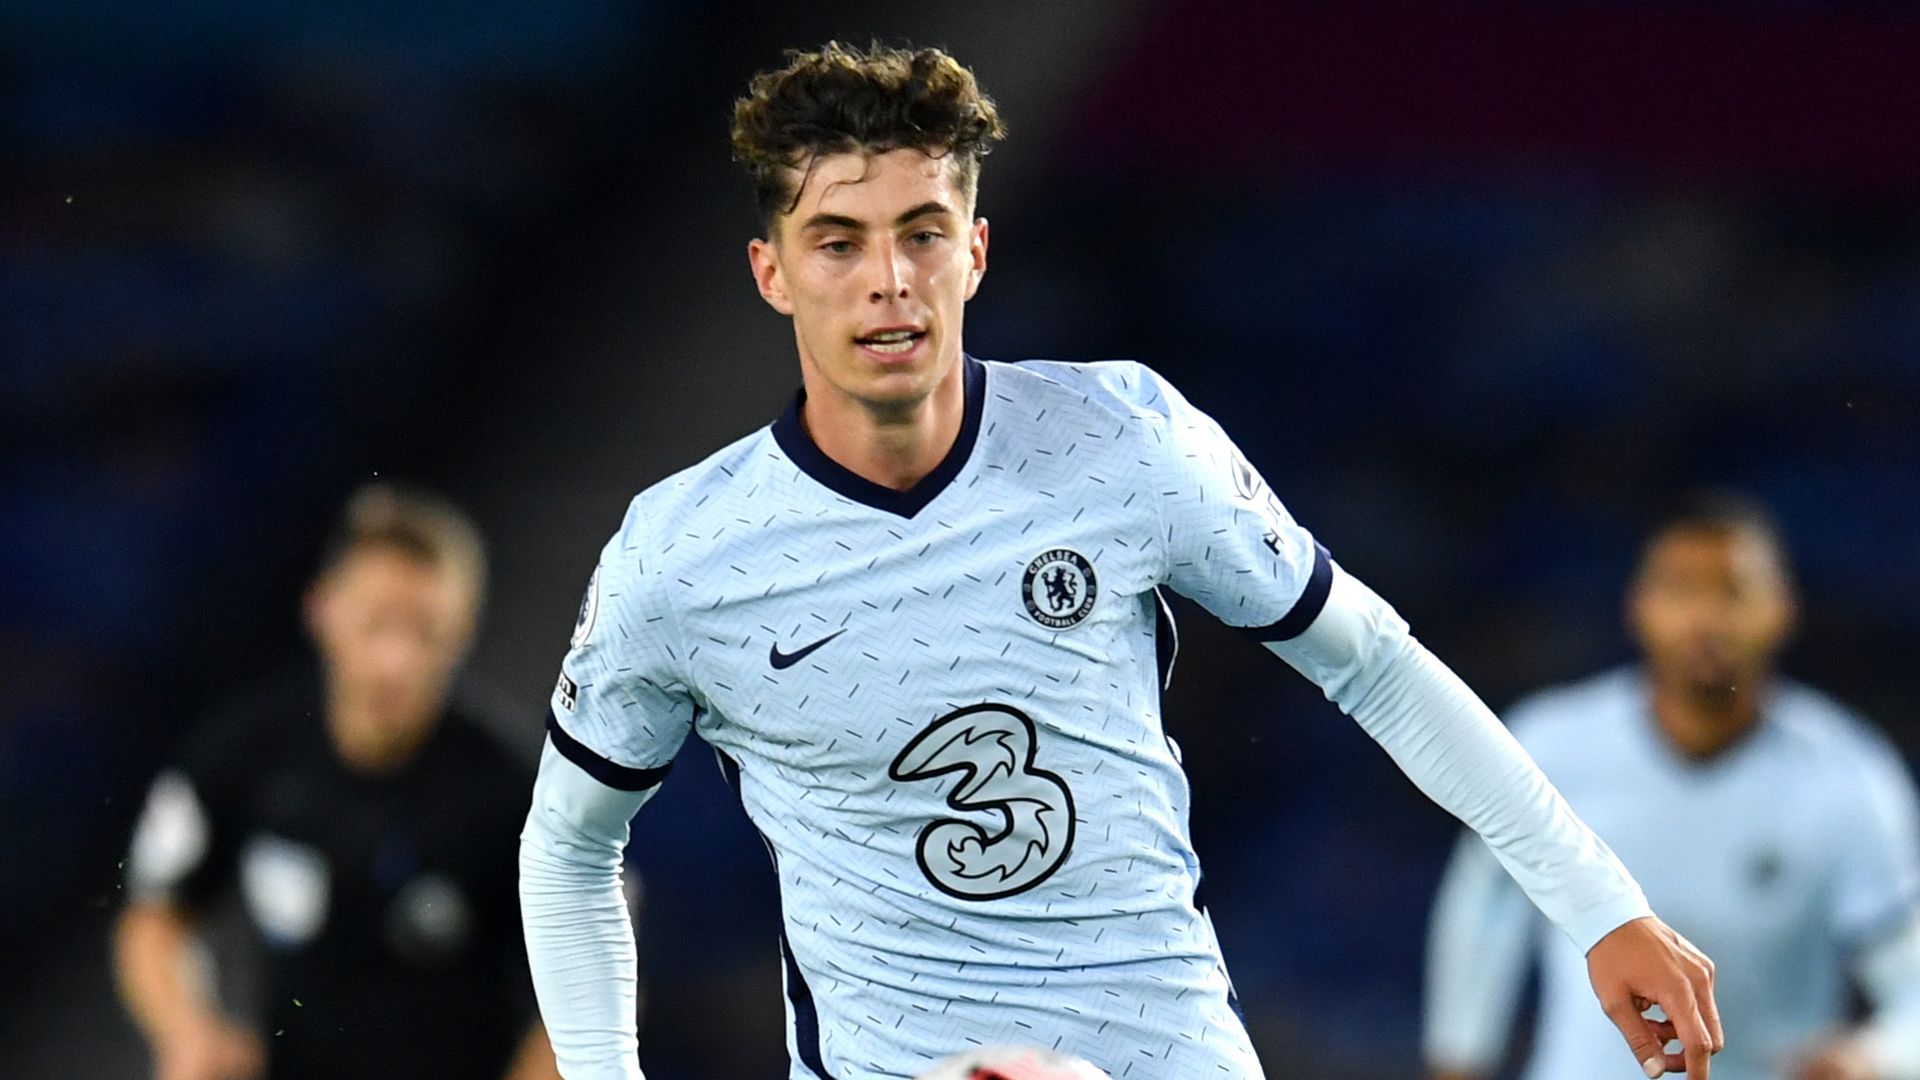 Havertz admits Premier League is 'much tougher than the Bundesliga' after testing Chelsea debut